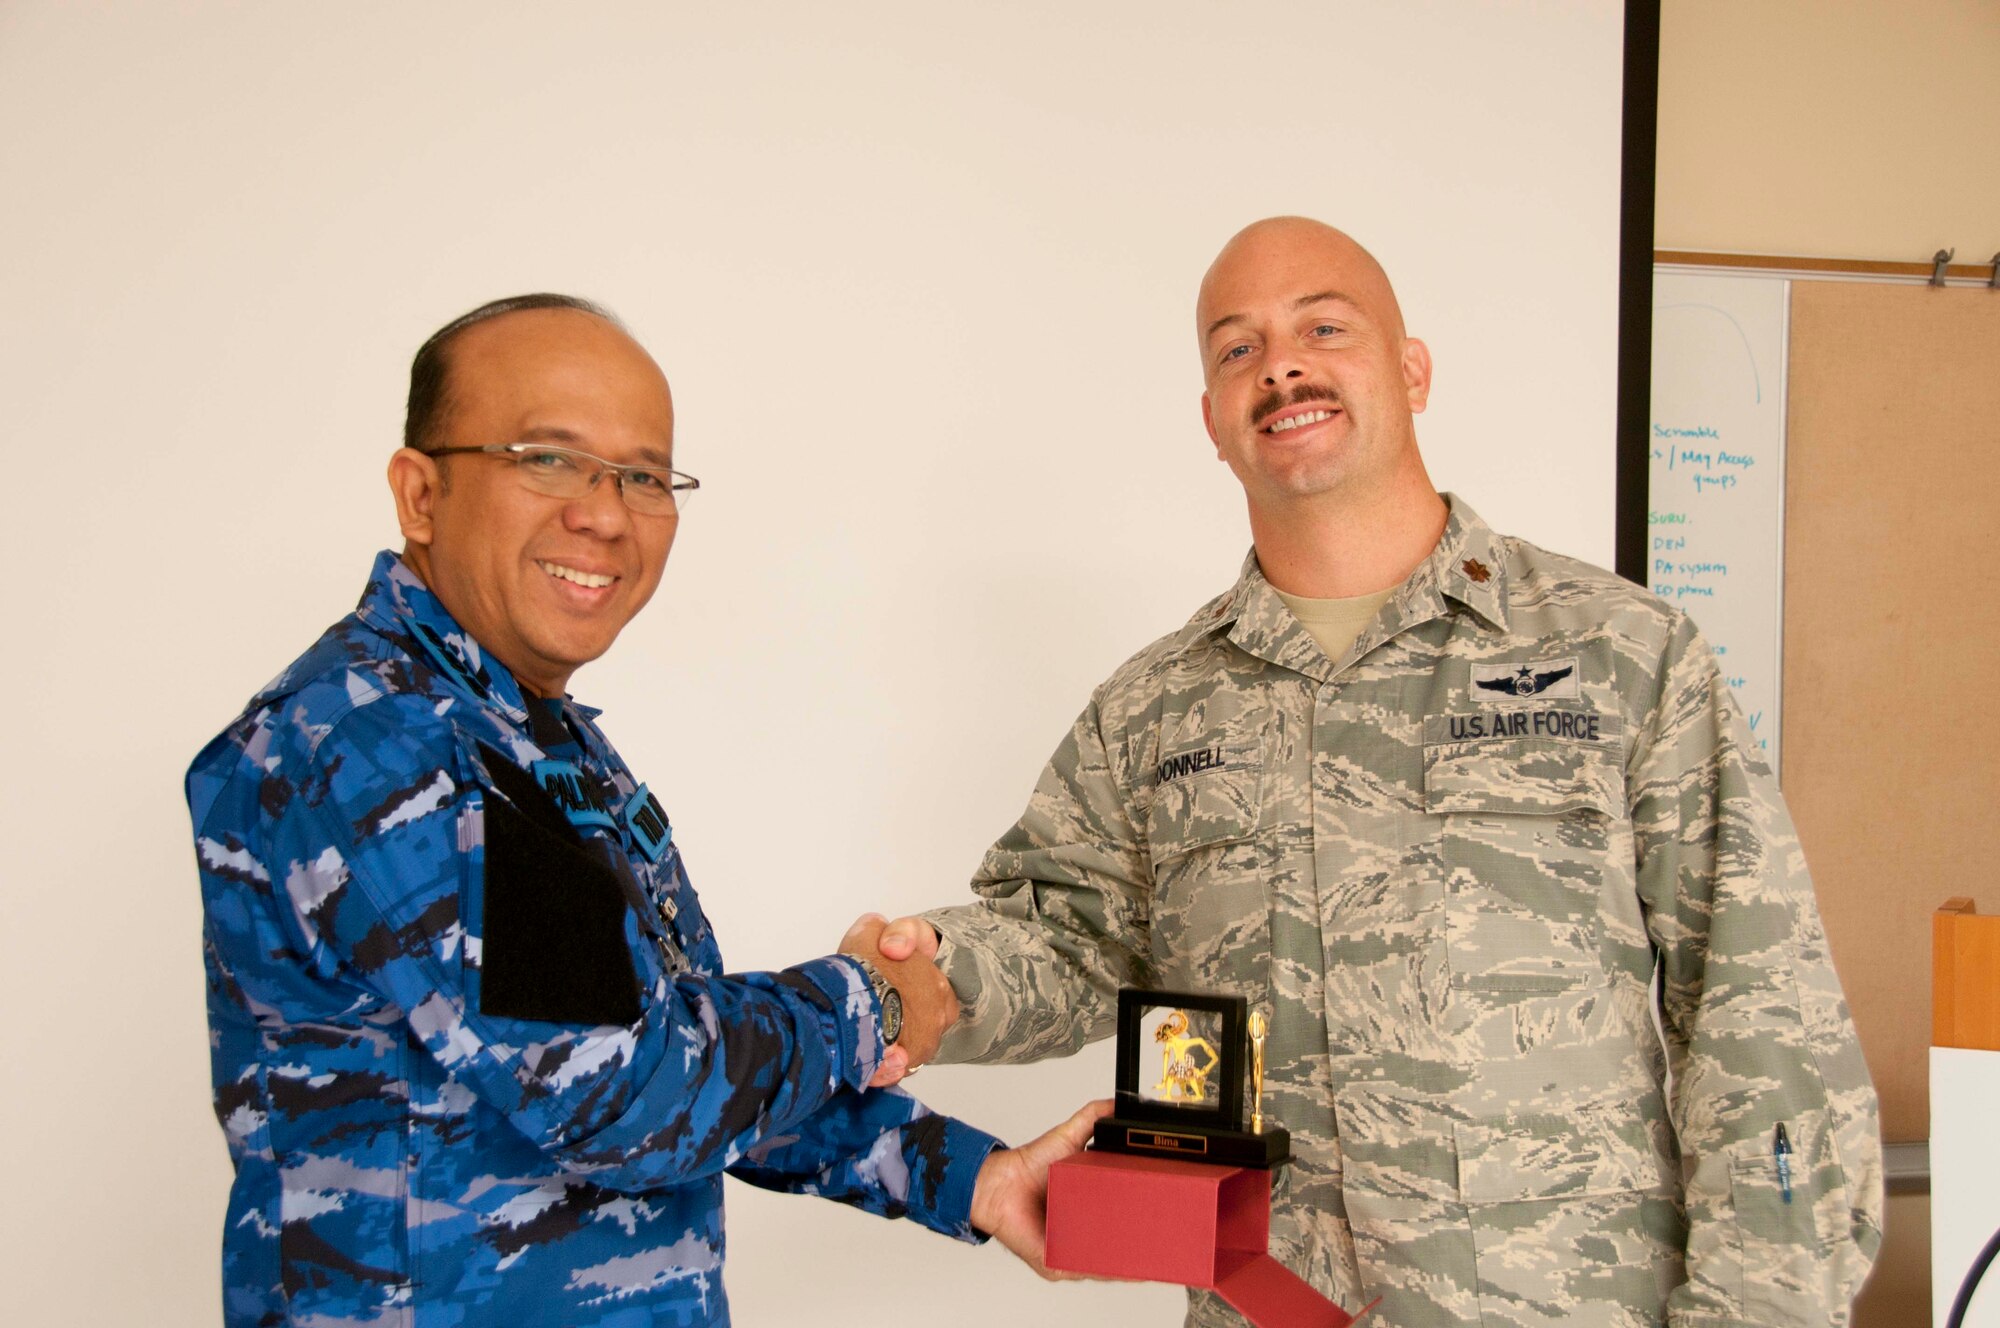 U.S. Air Force Maj. Michael O'Donnell accepts a gift of gratitude at the final day awards ceremony for the Subject Matter Expert Exchange, from the Indonesian air defense delegation's head officer Col. Palito Sitorus. This is the second time a Subject Matter Expert Exchange between the Indonesian air defense and the 169th Air Defense Squadron has been conducted and the first time the Indonesians have come to Hawaii. (U.S. Air National Guard photo by Airman 1st Class Stan Pak/released)